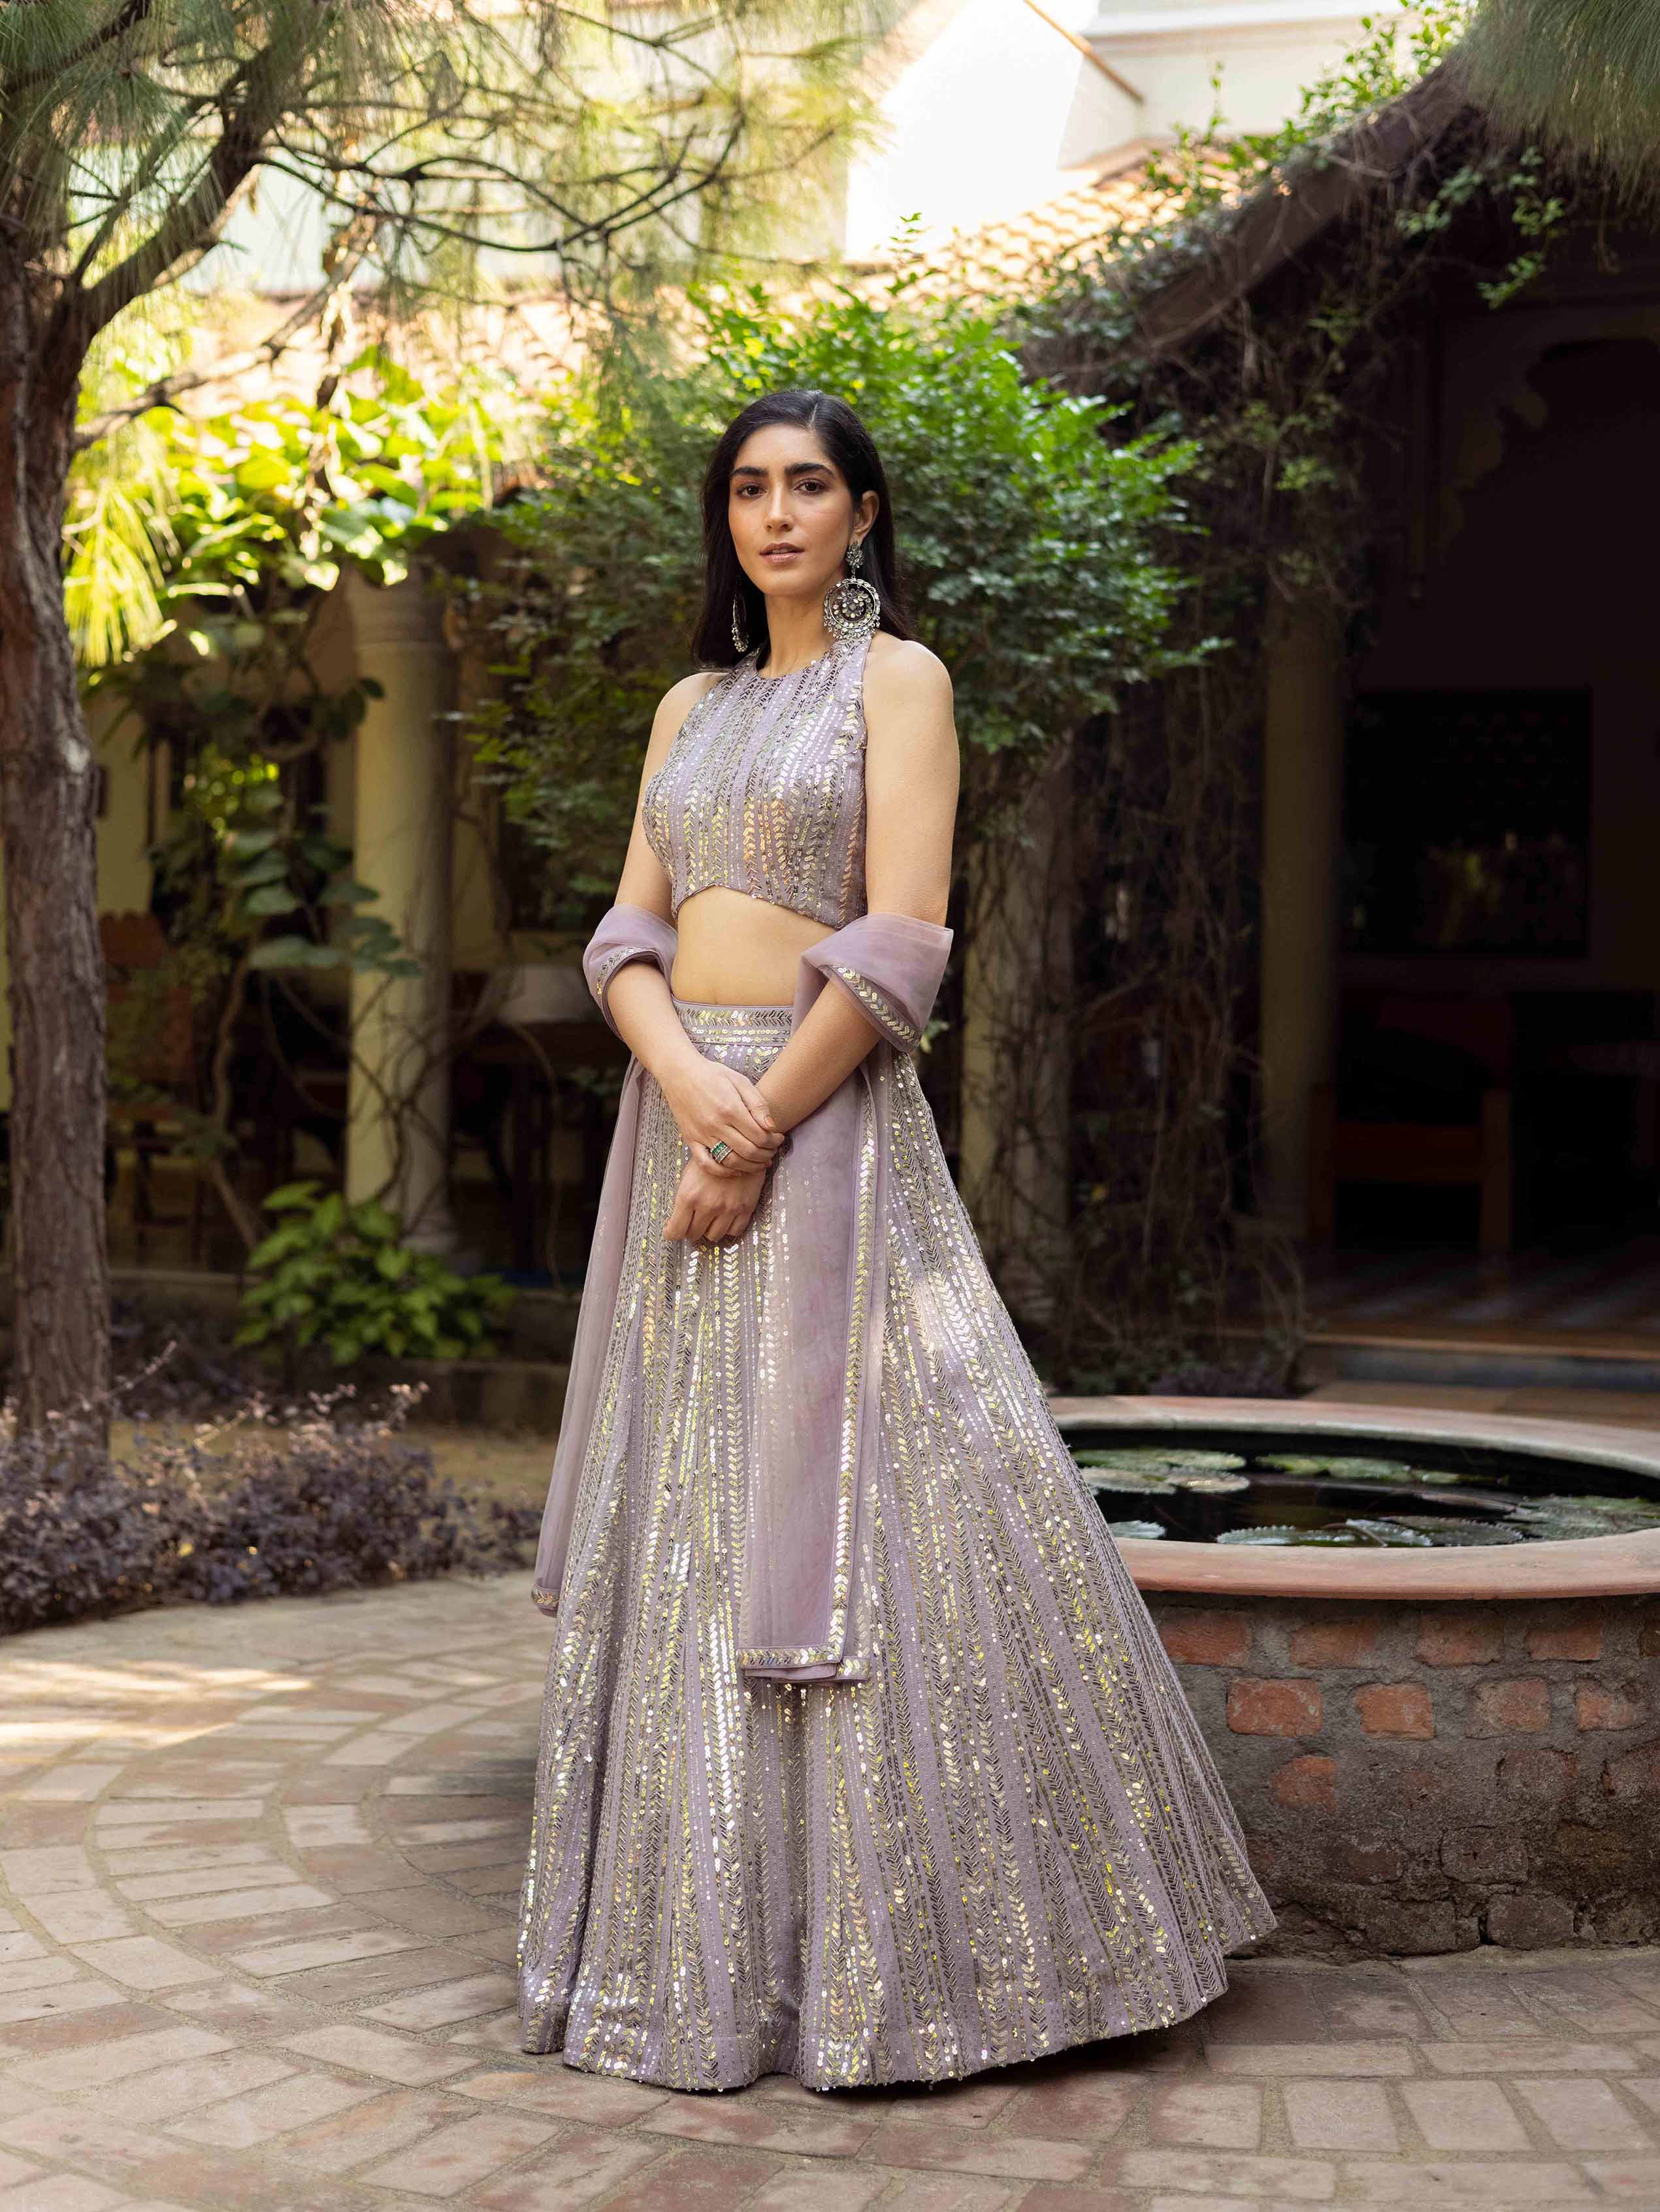 Bride Chose A Baby Pink Hued Lehenga And Styled It With 'Kundan' Jewellery  To Add a Pop Of Colour